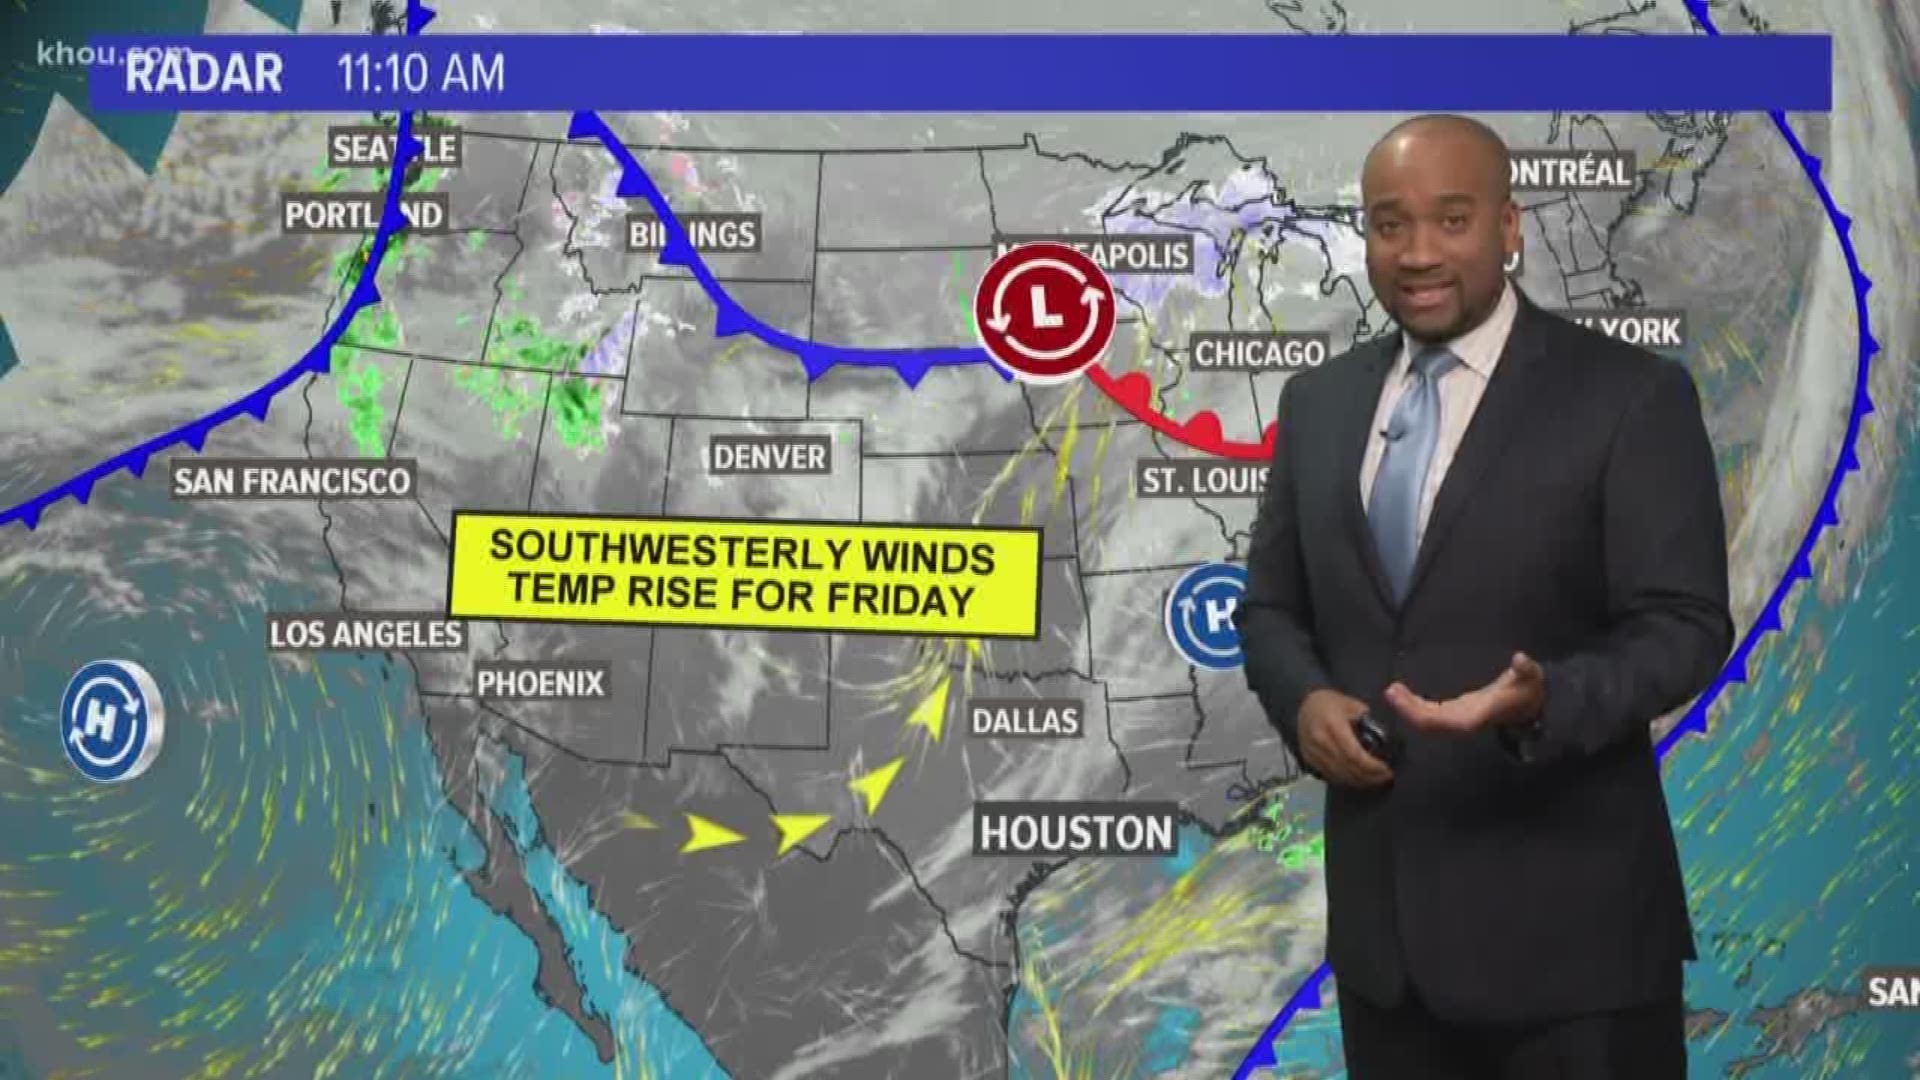 High Pressure Is Here Through Sunday, Then A Cold Front Brings Rain For Monday